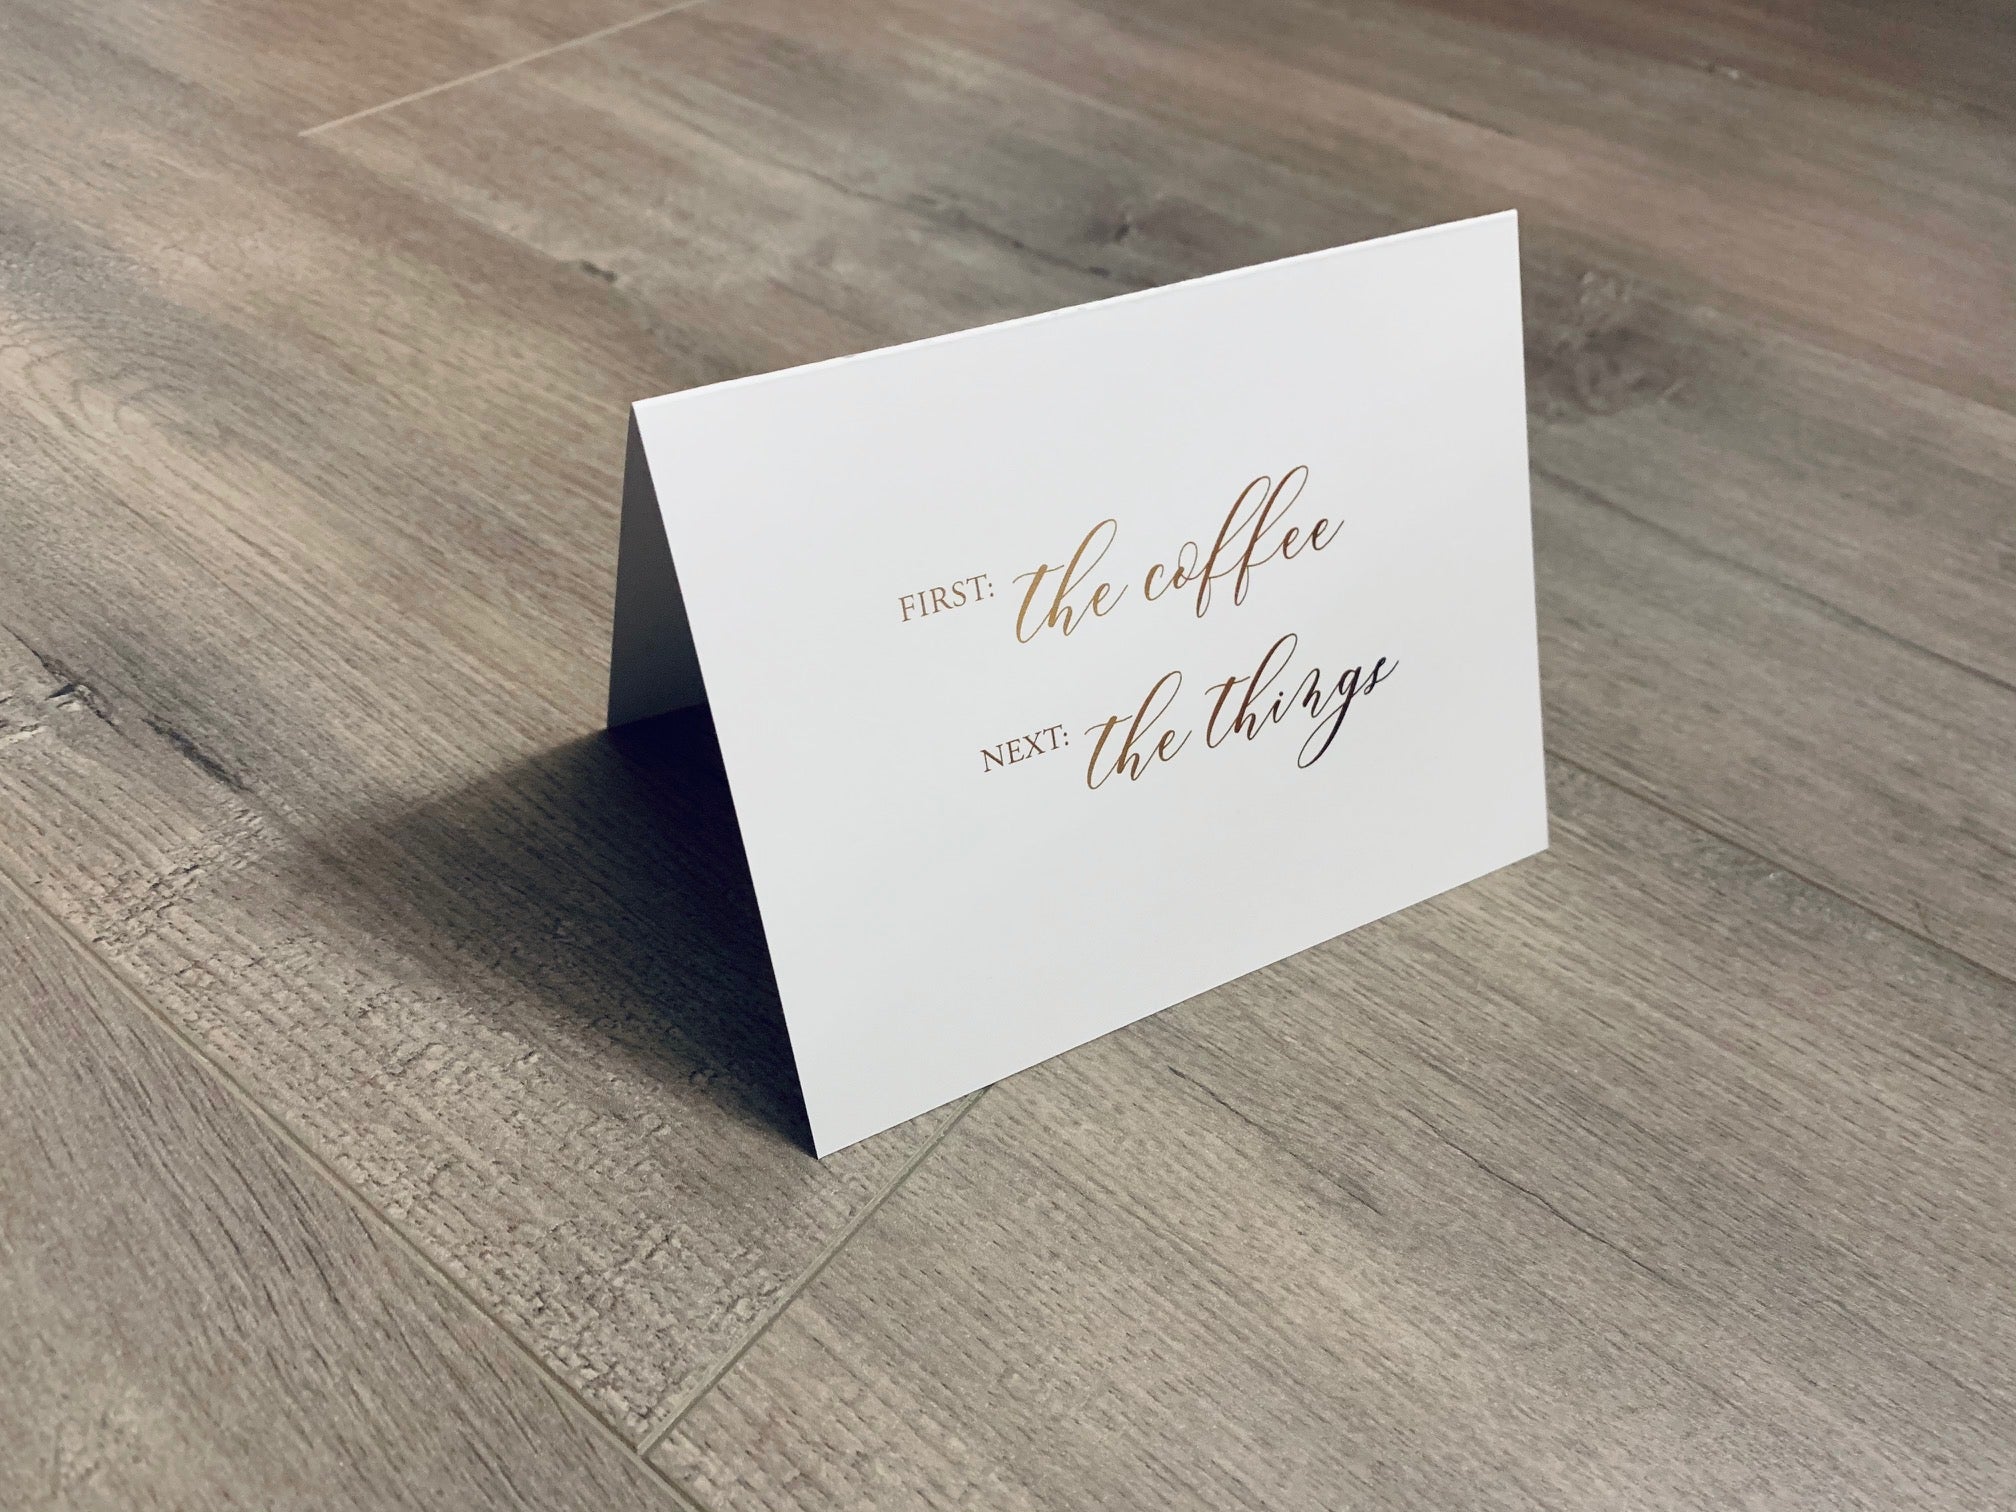 A white, folded notecard sits on a wooden floor. The card says, "First - the coffee. Next - the things." Coffee and Conquer collection by Stationare.